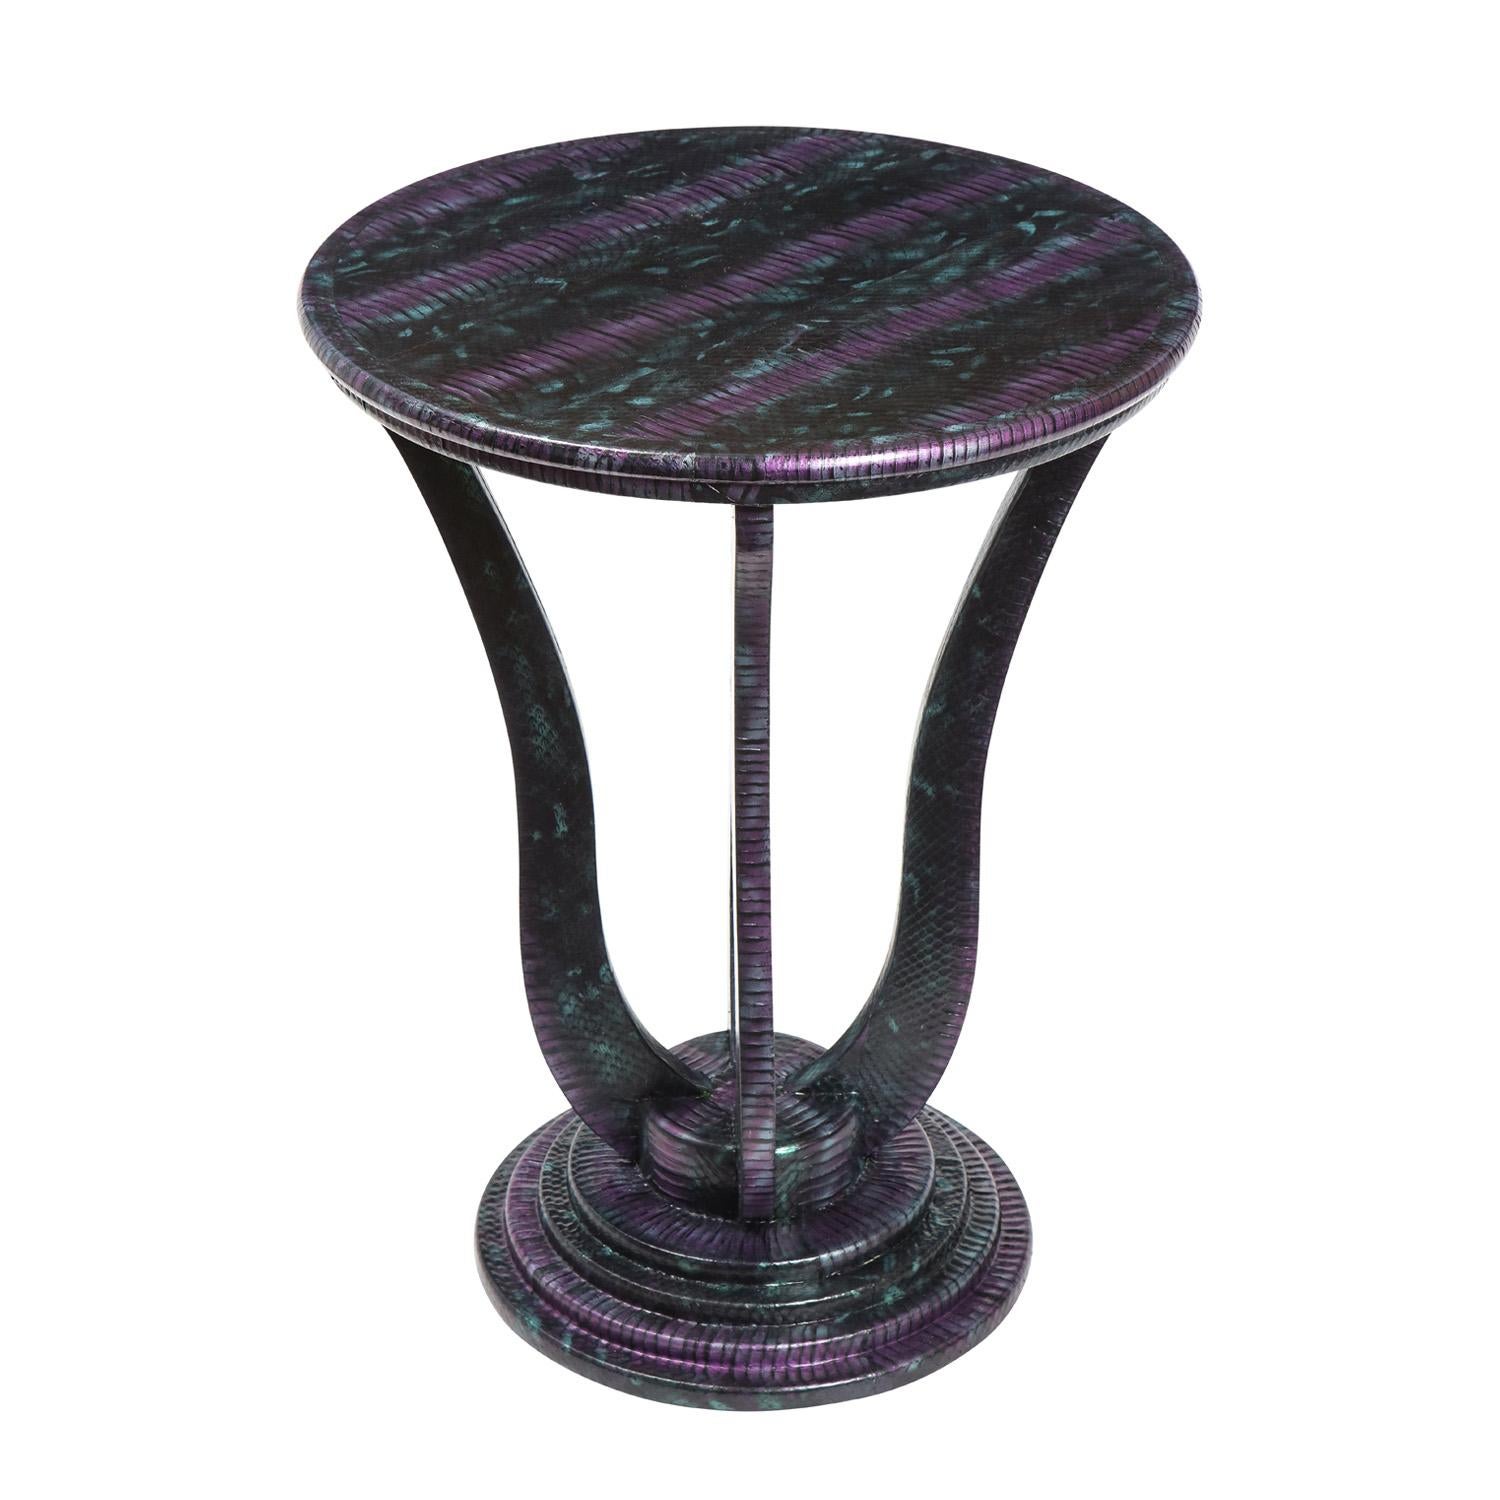 Round side table with stepped base and curved vertical elements in purple, black and teal snake skin by Evan Lobel for Lobel Originals, American 2021. The colors of this table are exquisite and the craftsmanship is exceptional.